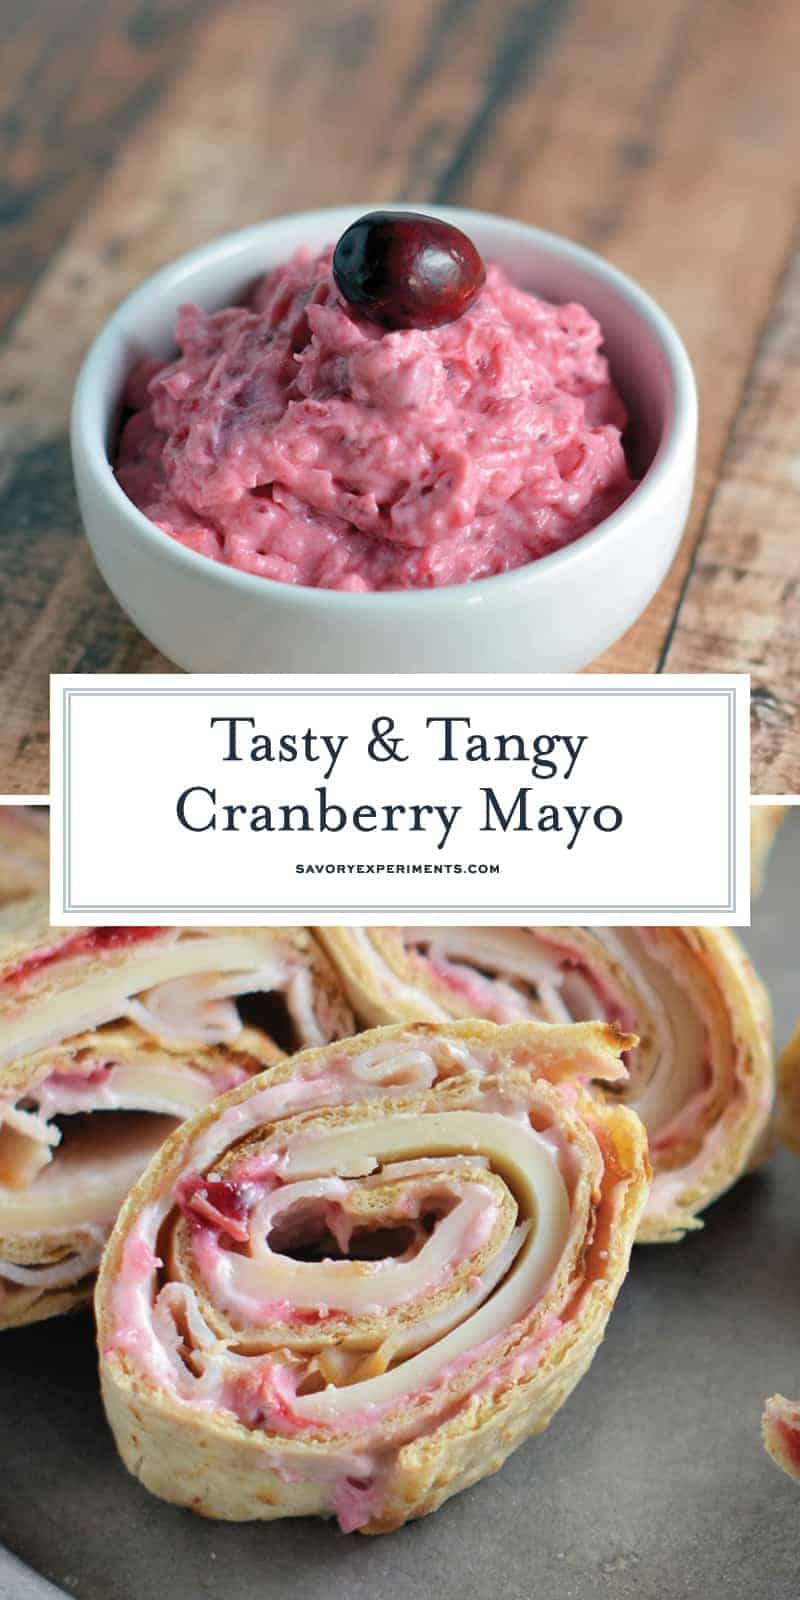 If you like mayonnaise, you will LOVE my Cranberry Mayo. Slightly sweet and just a touch tart, it adds a new dimension to any sandwich. #cranberrymayo #cranberrysauce #cranberryrelish www.savoryexperiments.com